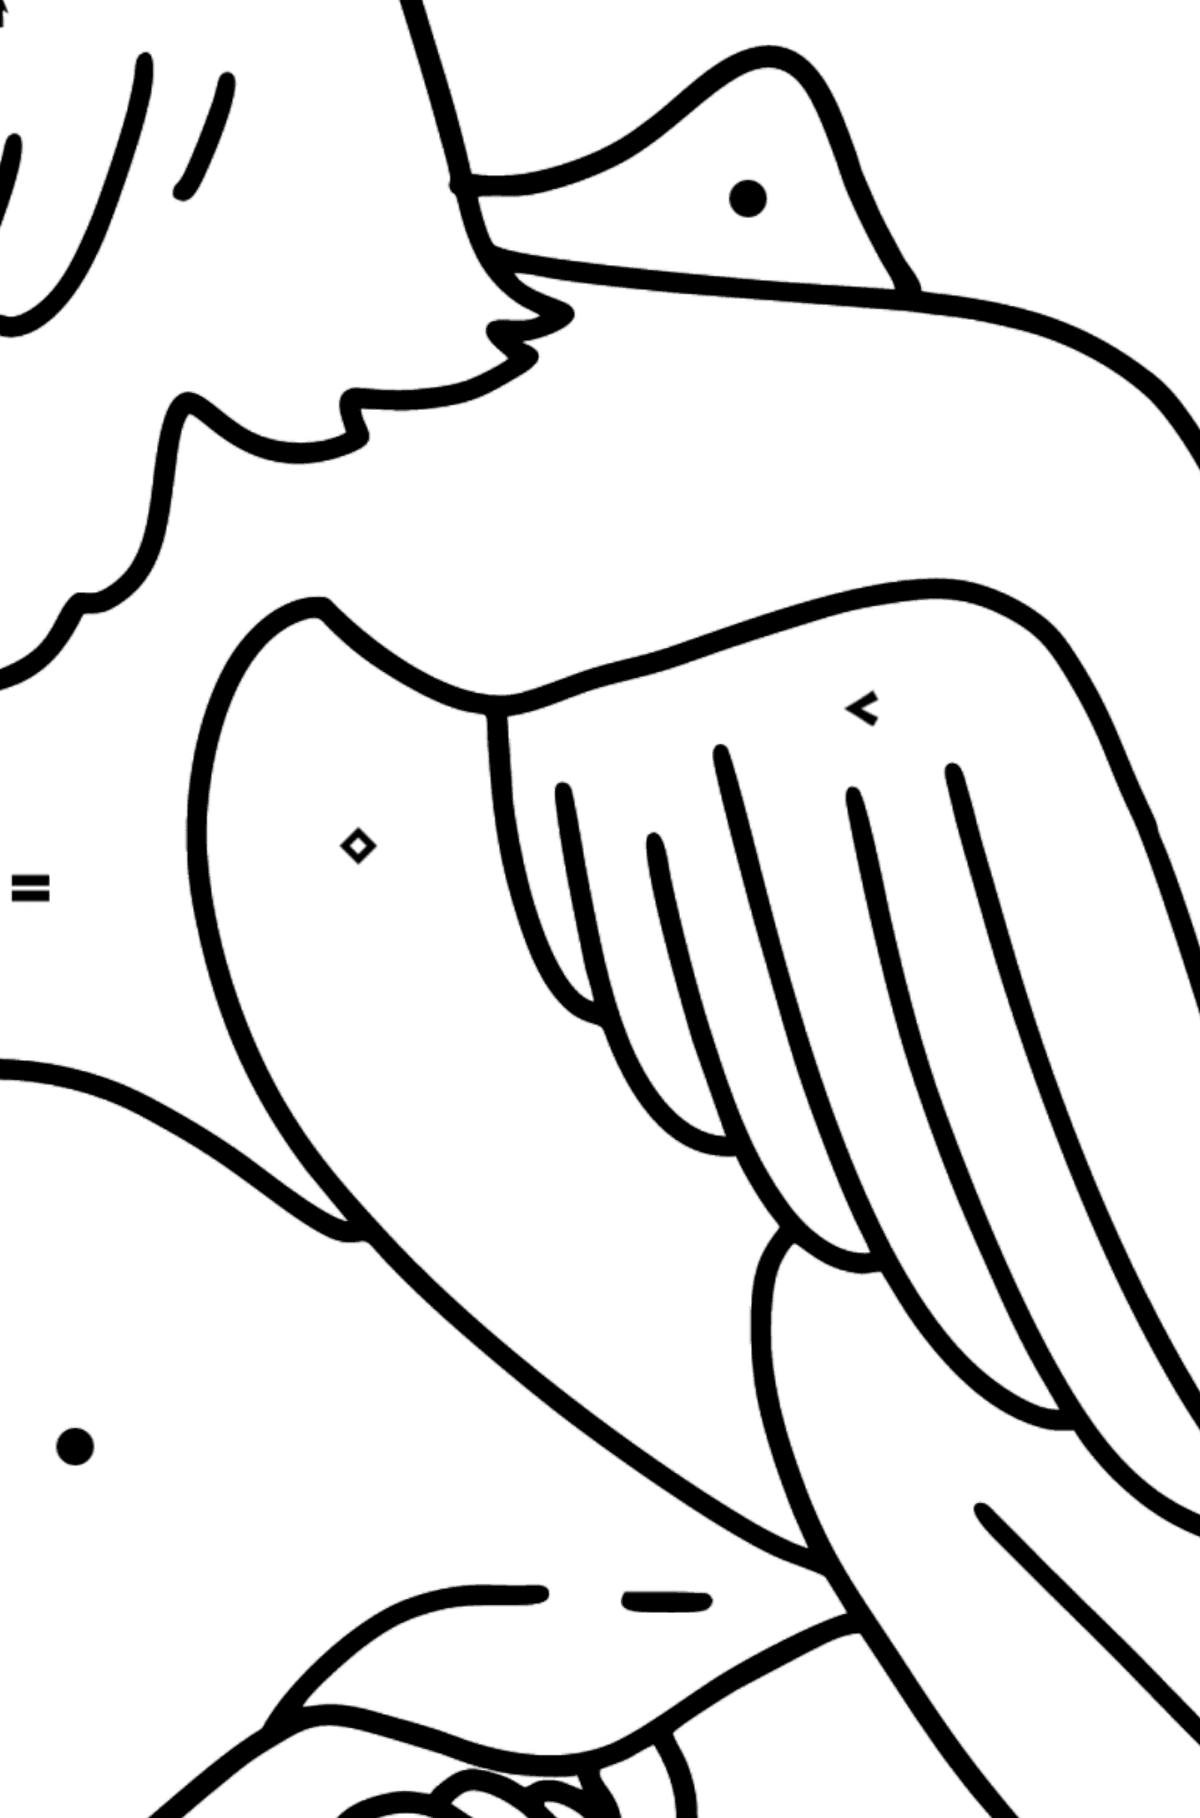 A beautiful eagle coloring page - Coloring by Symbols for Kids